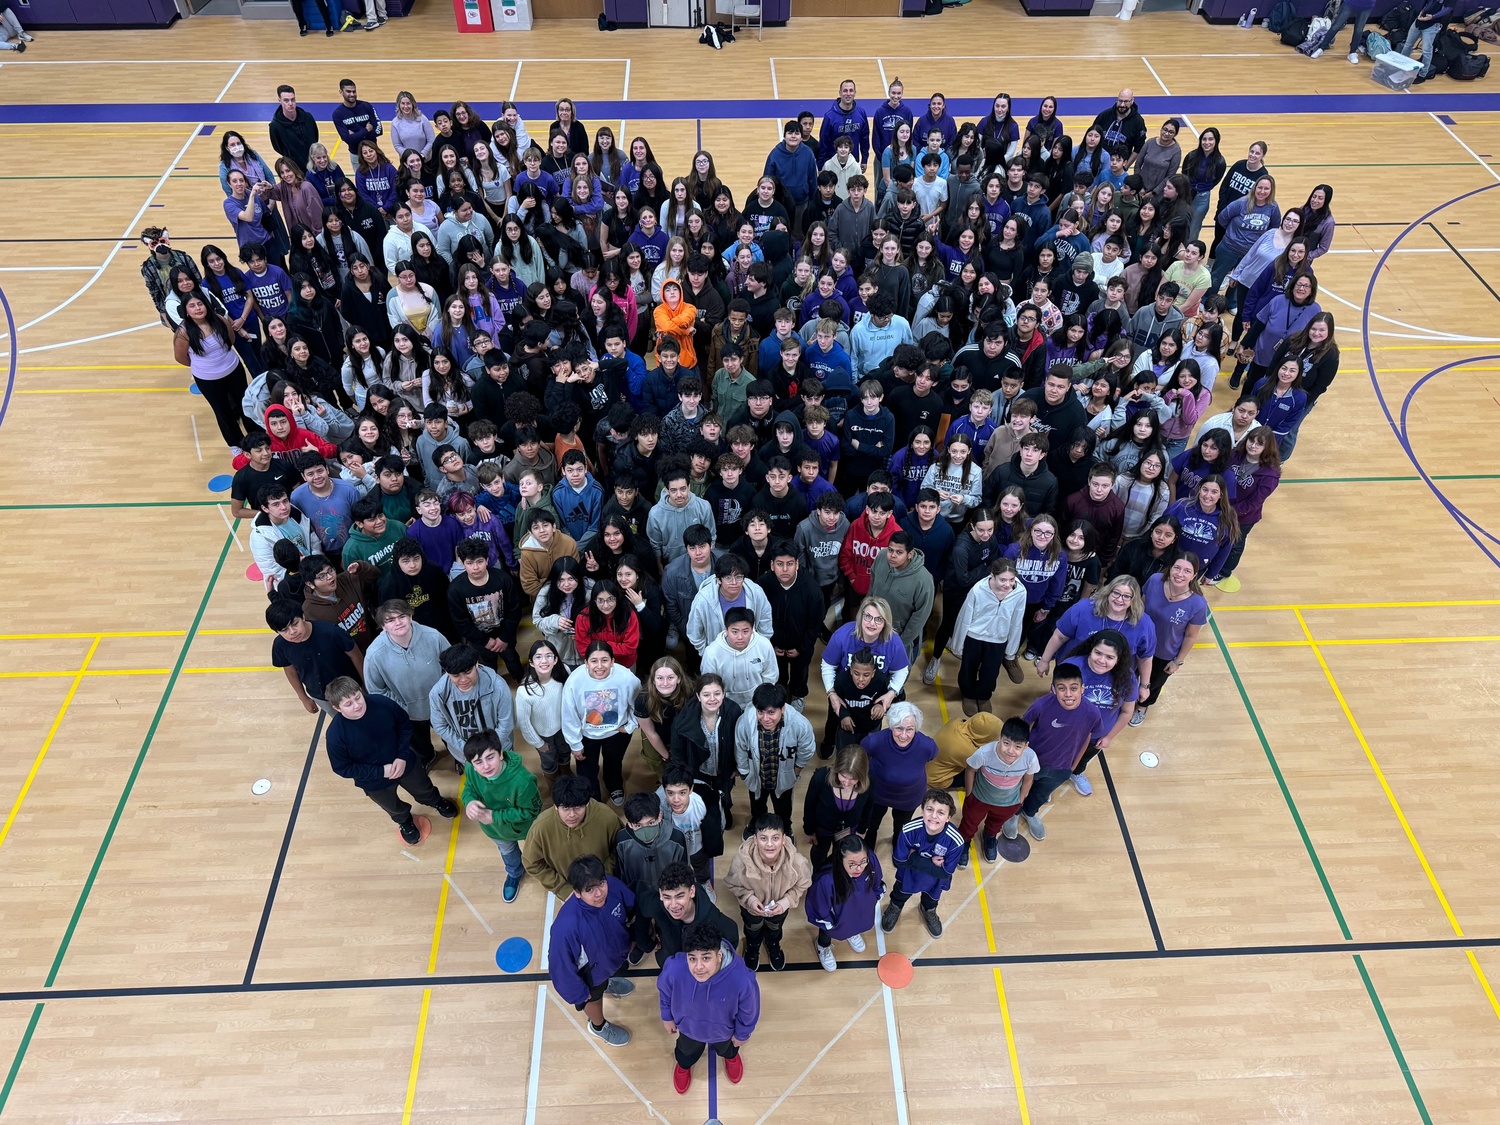 Hampton Bays Middle School students celebrated P.S. I Love You Day on Feb. 9 to raise awareness about bullying and suicide while promoting kindness. The students embraced the theme by showing kindness to their peers. They wrote positive messages on Post-it notes, created displays in their hallways and wore purple. They also formed a large heart for a group photo in the school’s gym. COURTESY HAMPTON BAYS SCHOOL DISTRICT